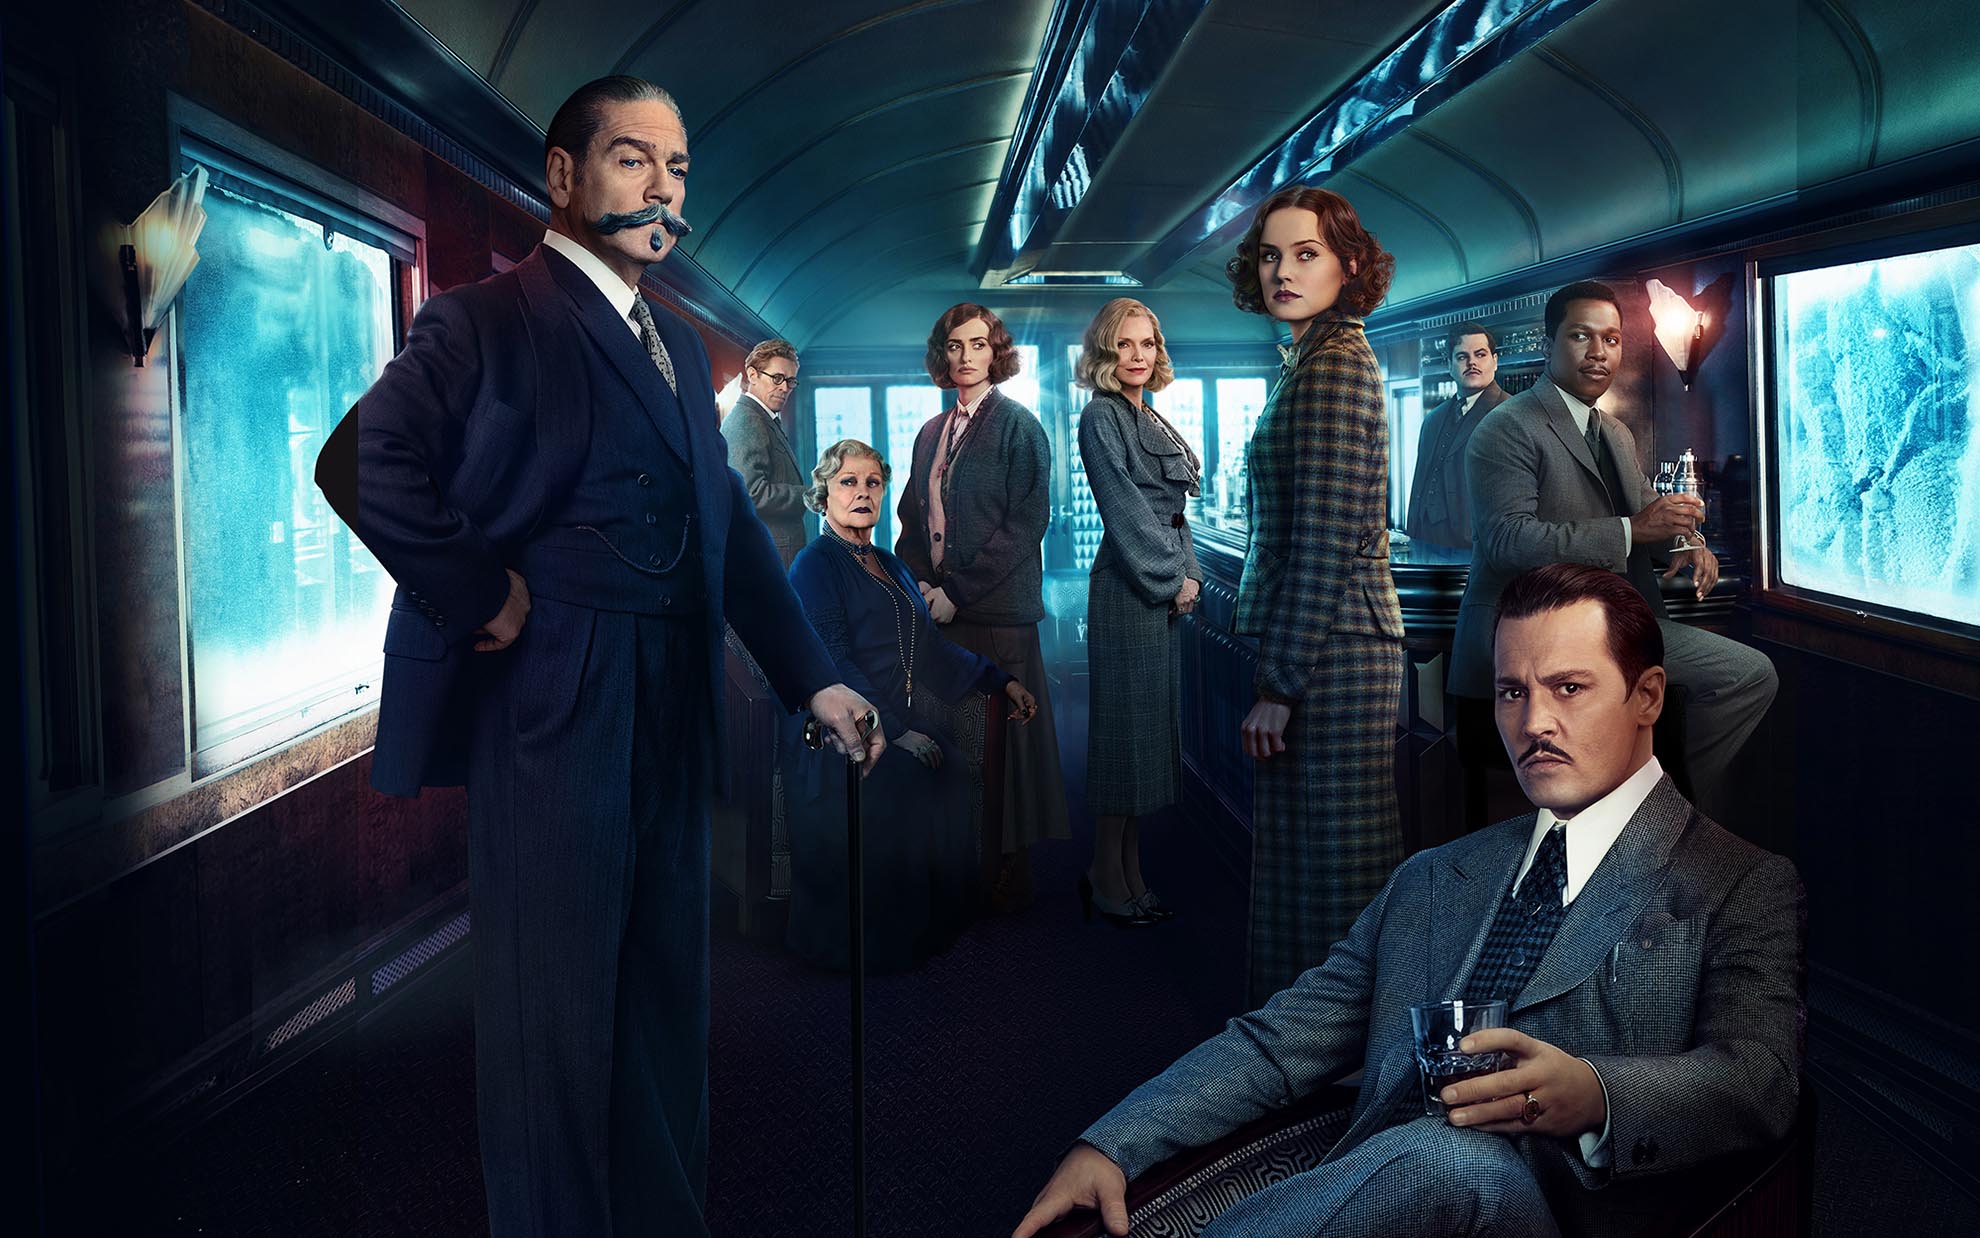 Kenneth Branagh’s 'Murder on the Orient Express' has been primed for a sequel, starring Hercule Poirot again.